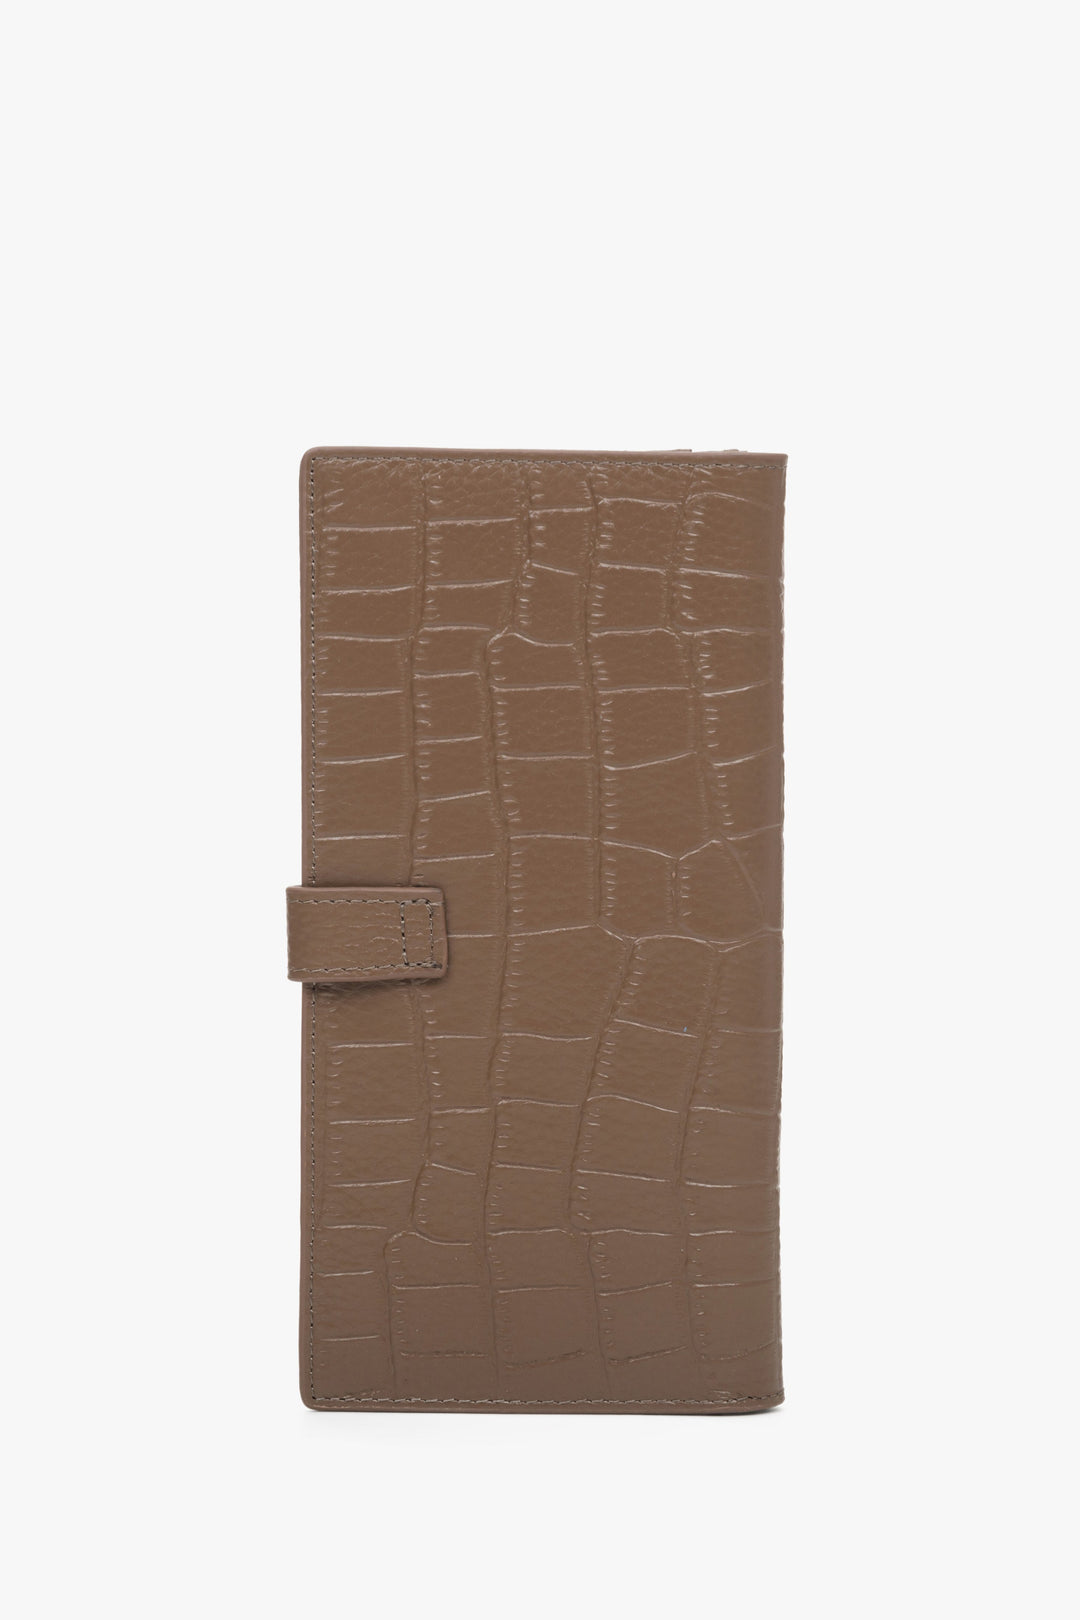 The back of a large brown women's wallet made of embossed genuine leather with gold details by Estro.